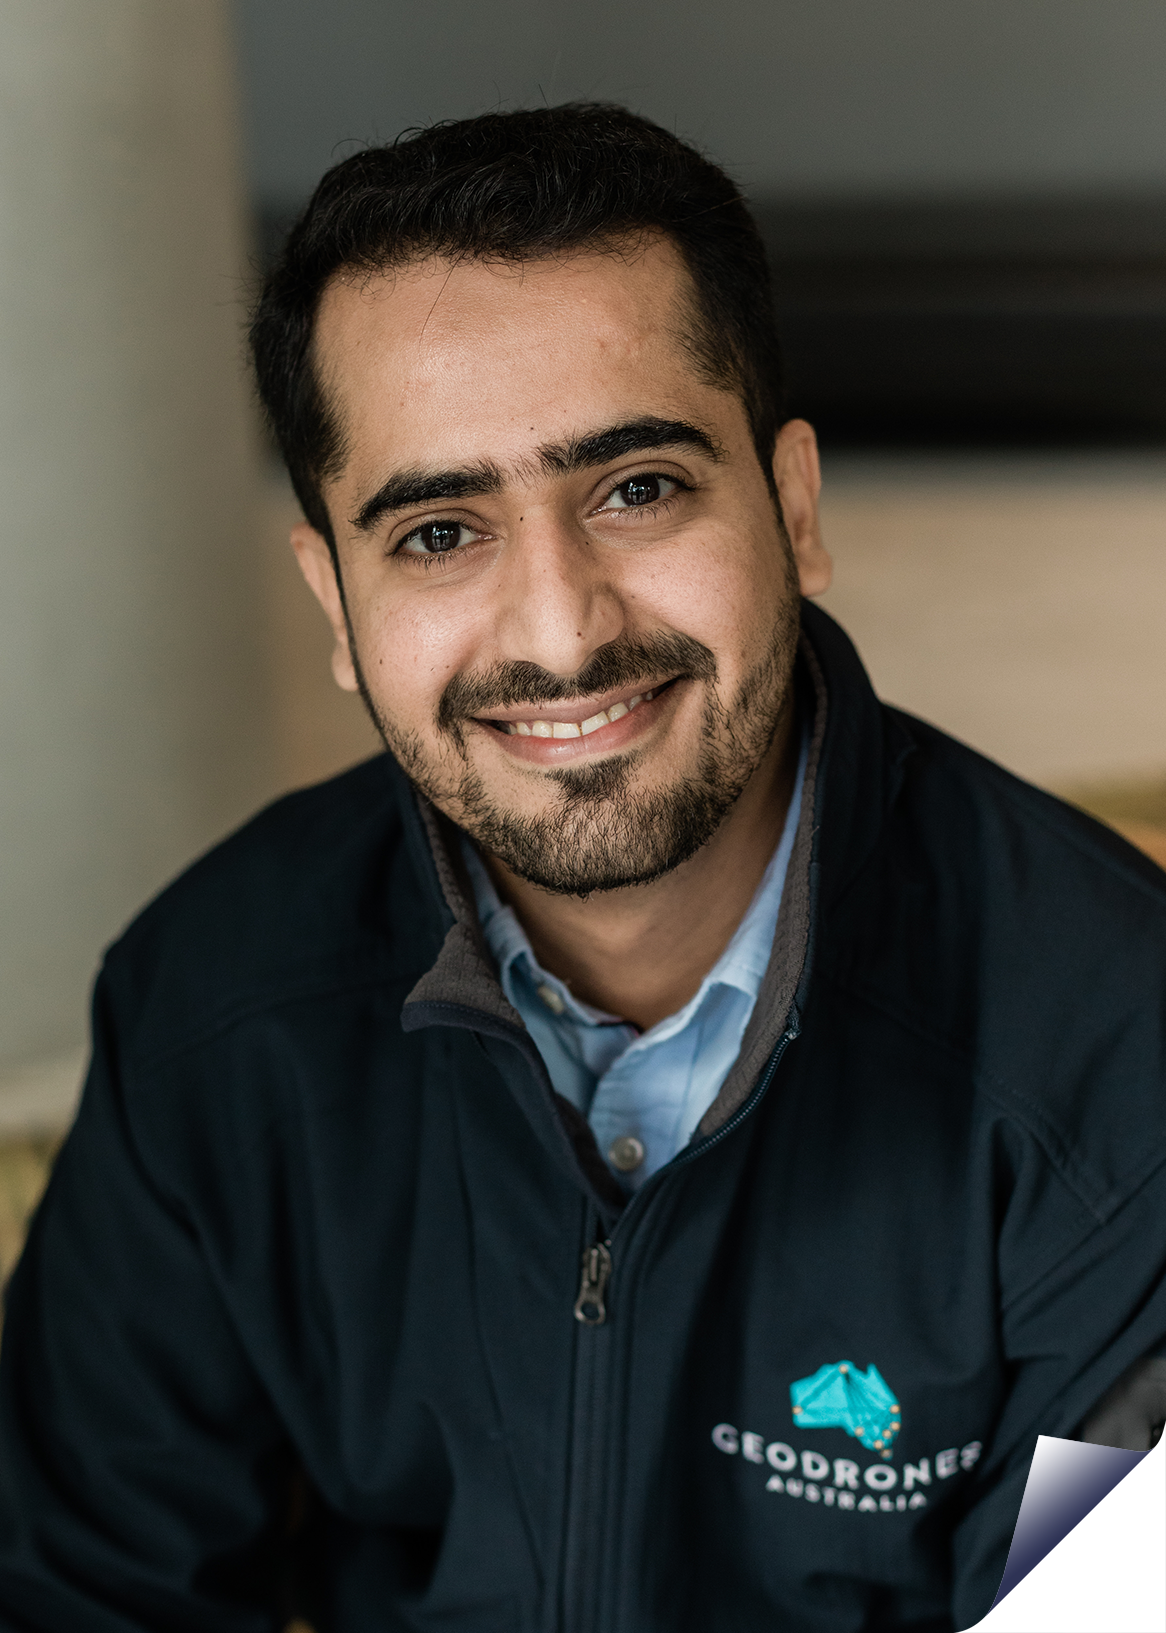 <p style="text-align: center;"><strong>Ayad Al Mahturi</strong></p>
<p>TEAM LEAD CONTROL / AVIONICS</p>
<p style="text-align: center;">
Ayad is a Mechatronics Engineer with interests in machine learning and control systems. Ayad has received his Bachelor and Masters of Mechatronics. He has completed a PhD in Electrical Engineering with a special focus on self-learning control approaches for autonomous systems at the UNSW Canberra.</p>